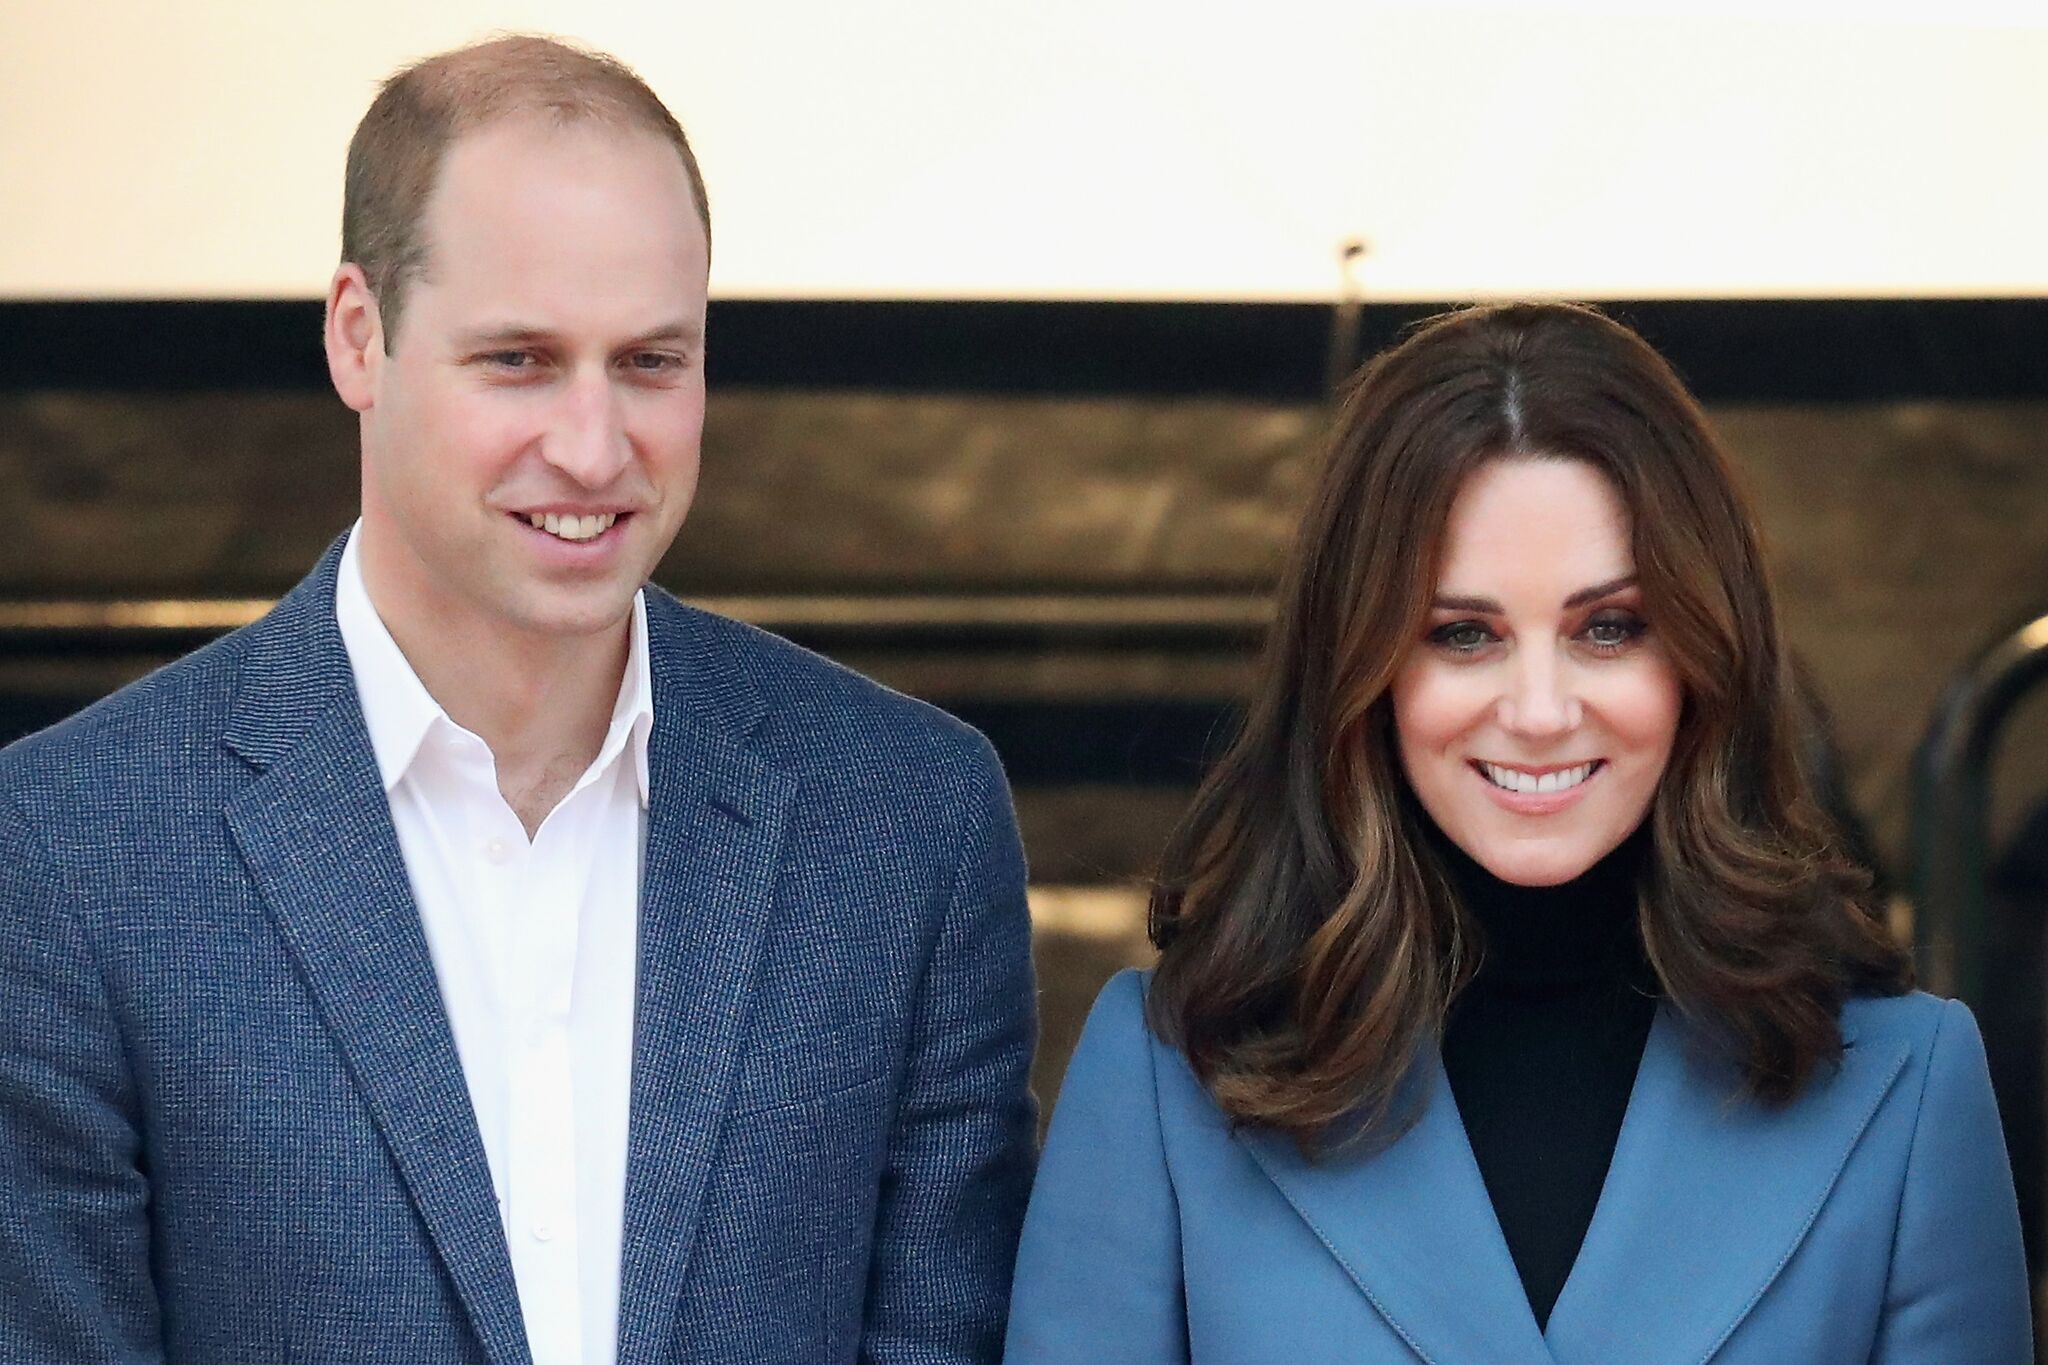 Prince William and Kate Middleton on October 18, 2017 at The London Stadium in London, England. | Photo: Getty Images